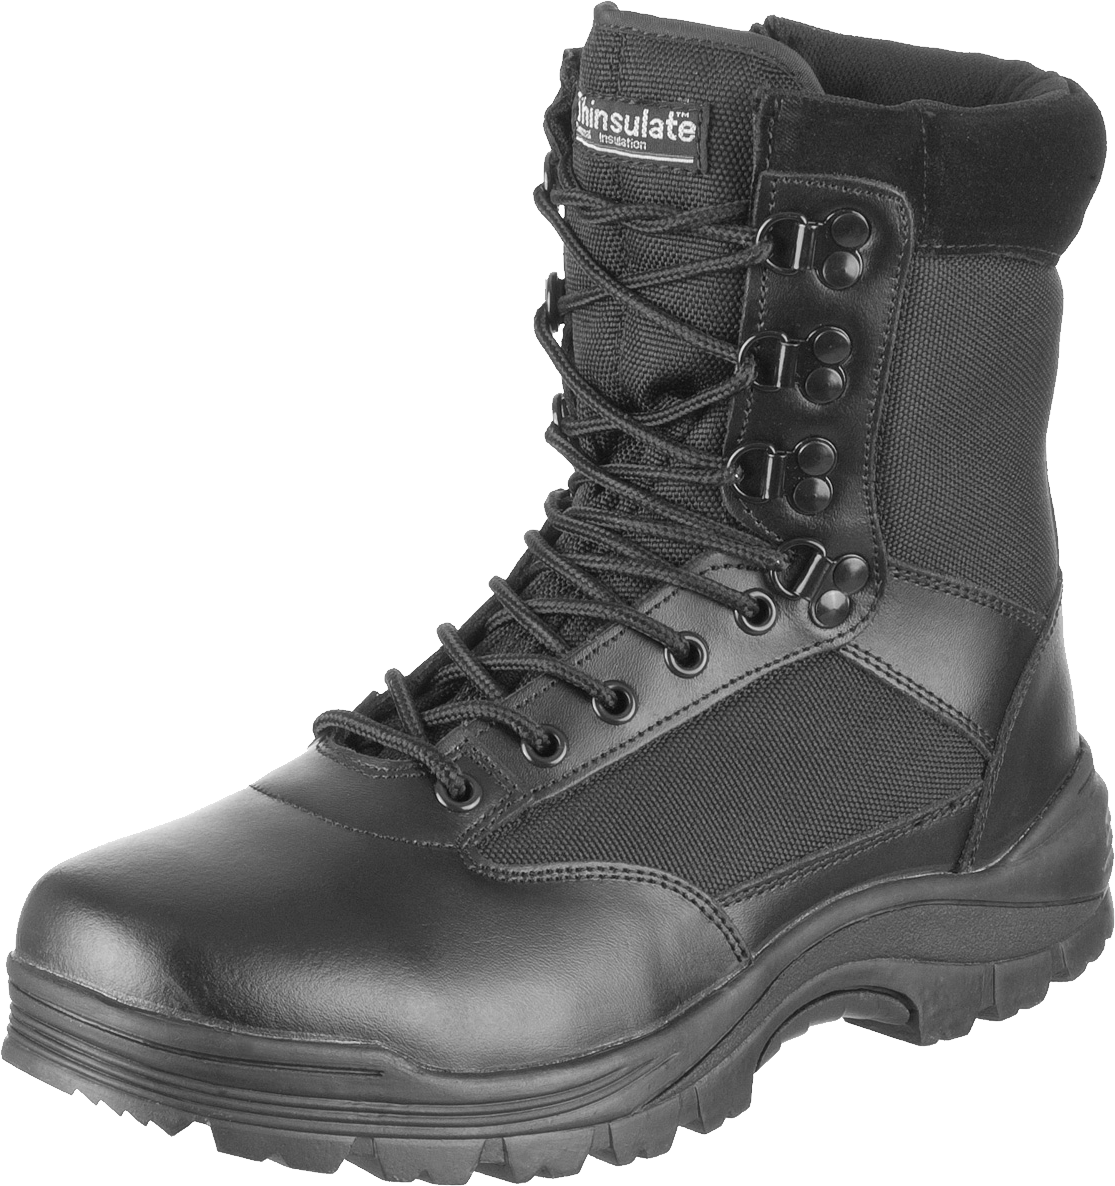 Combat Boots Png Image - Boot, Transparent background PNG HD thumbnail